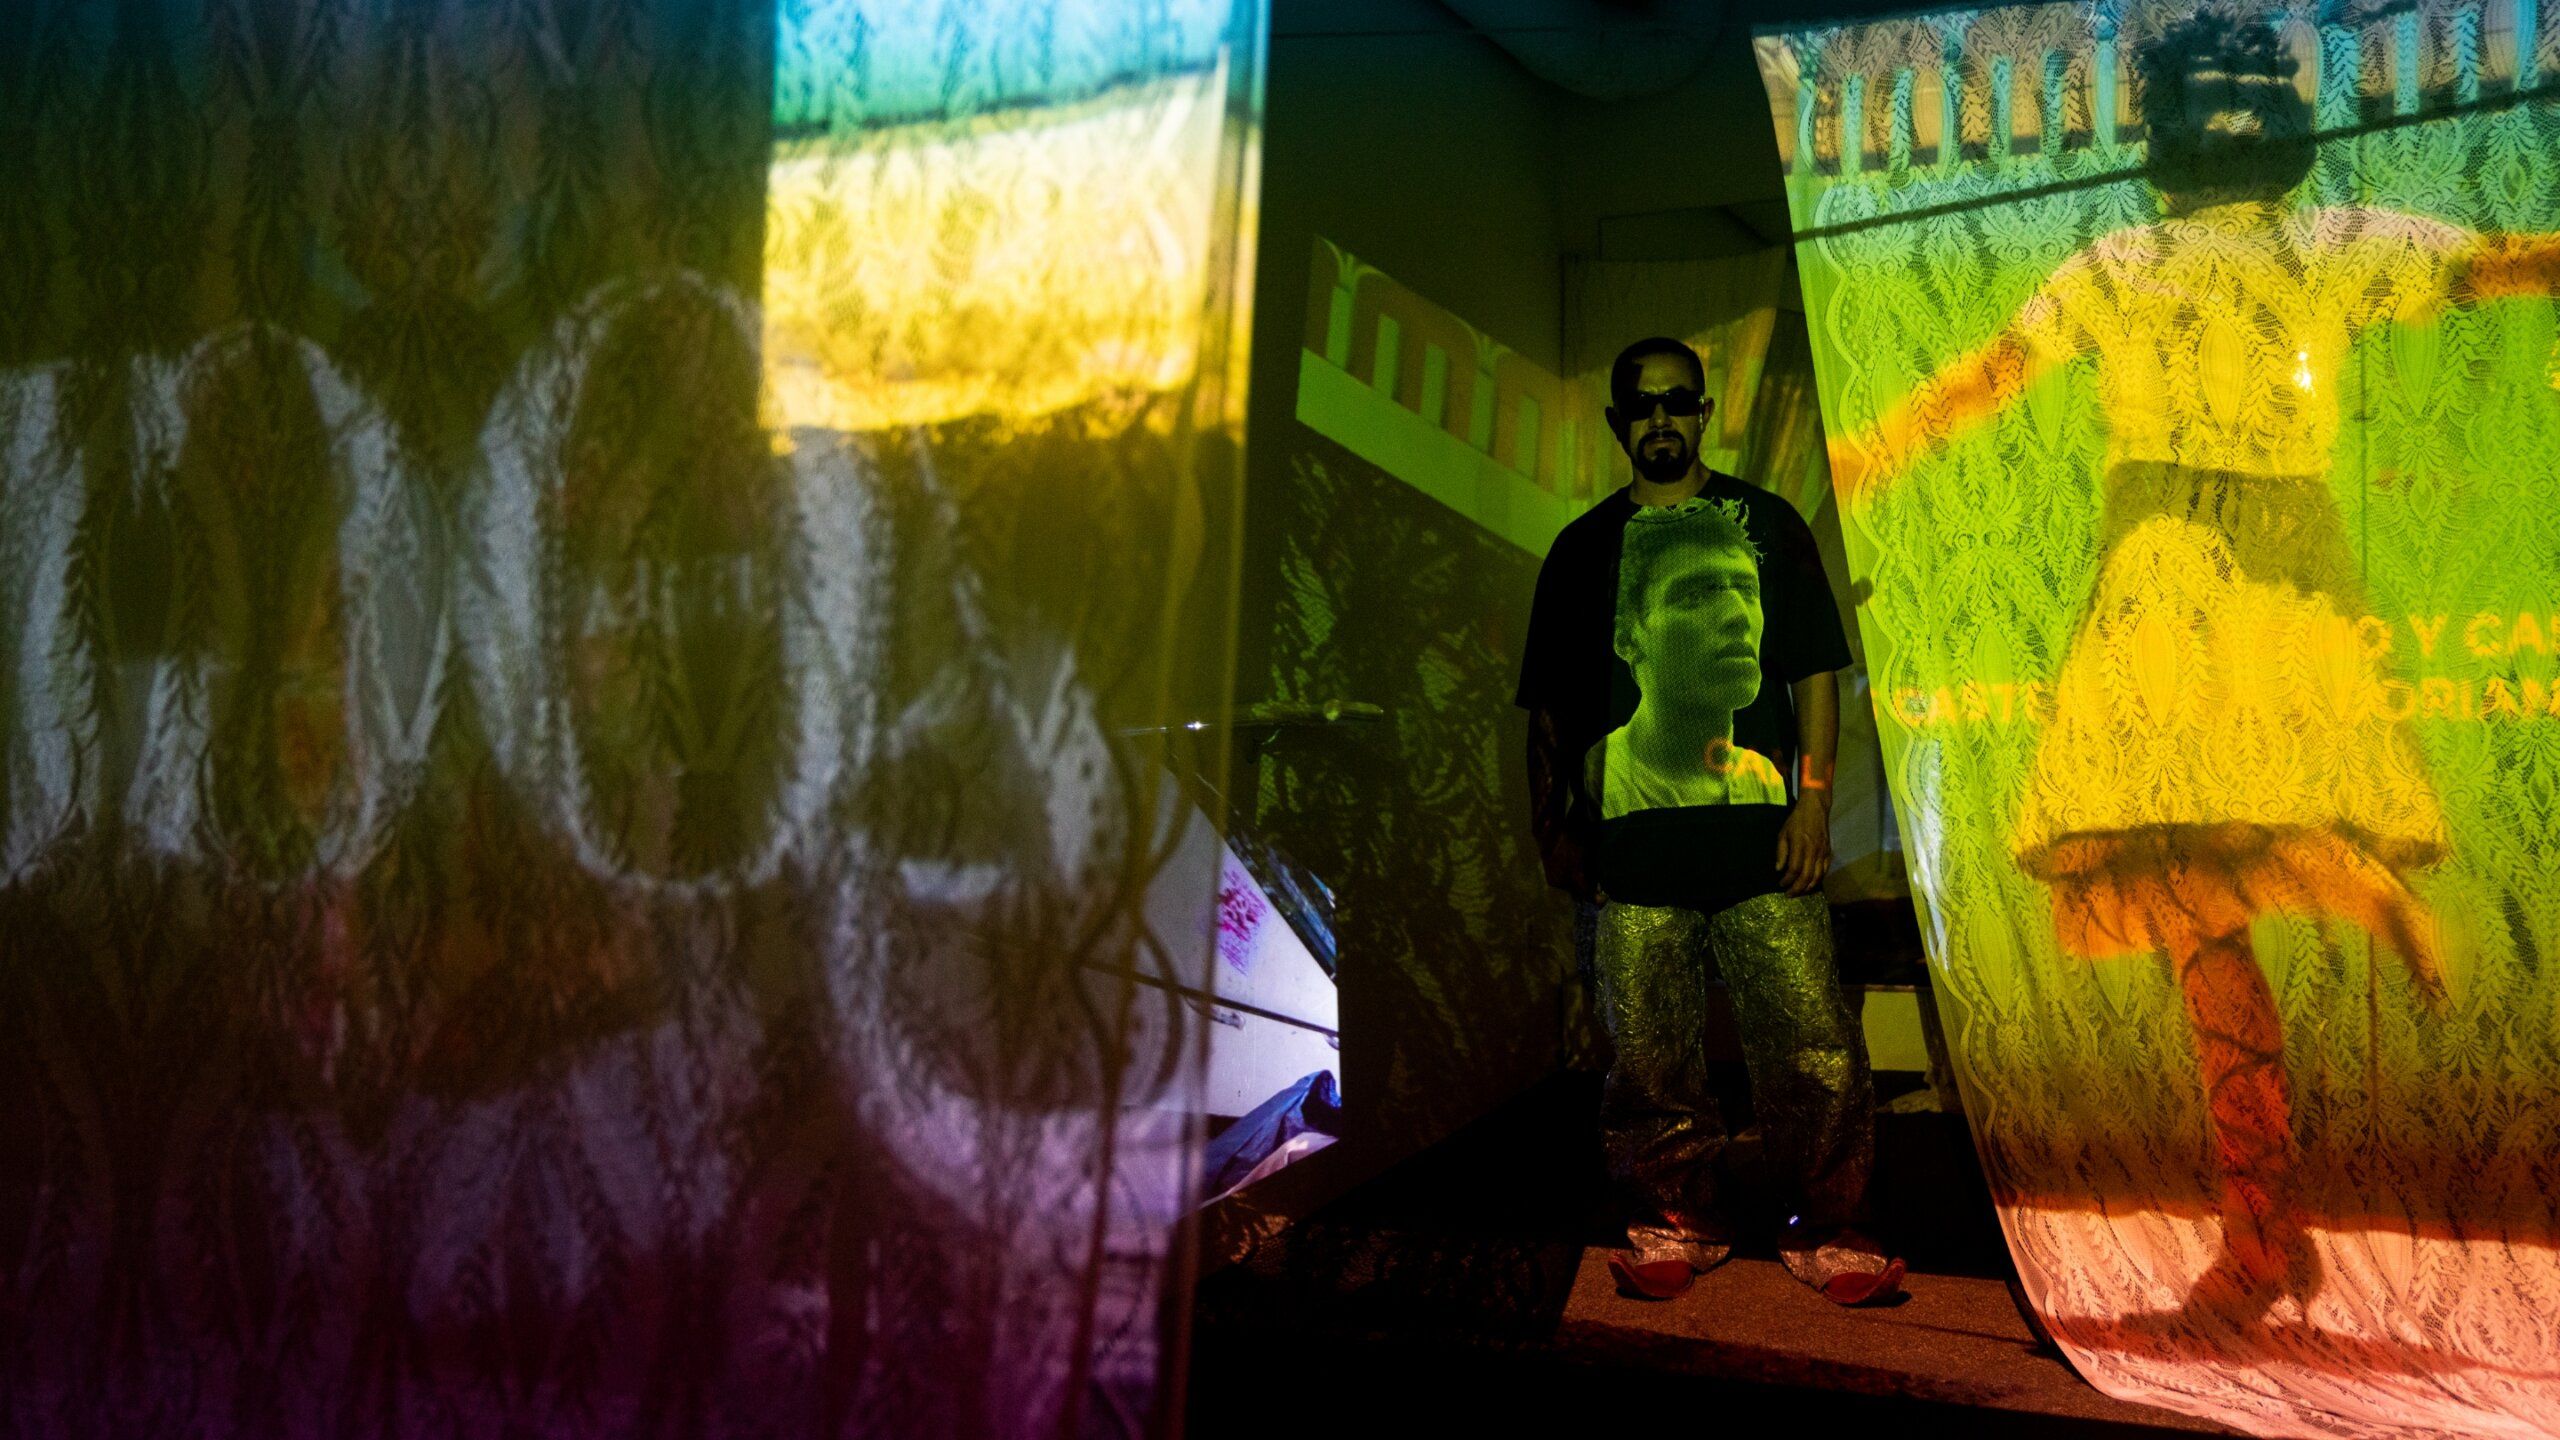 Dorian stands in room with multiple projections of his video work onto sheer fabric